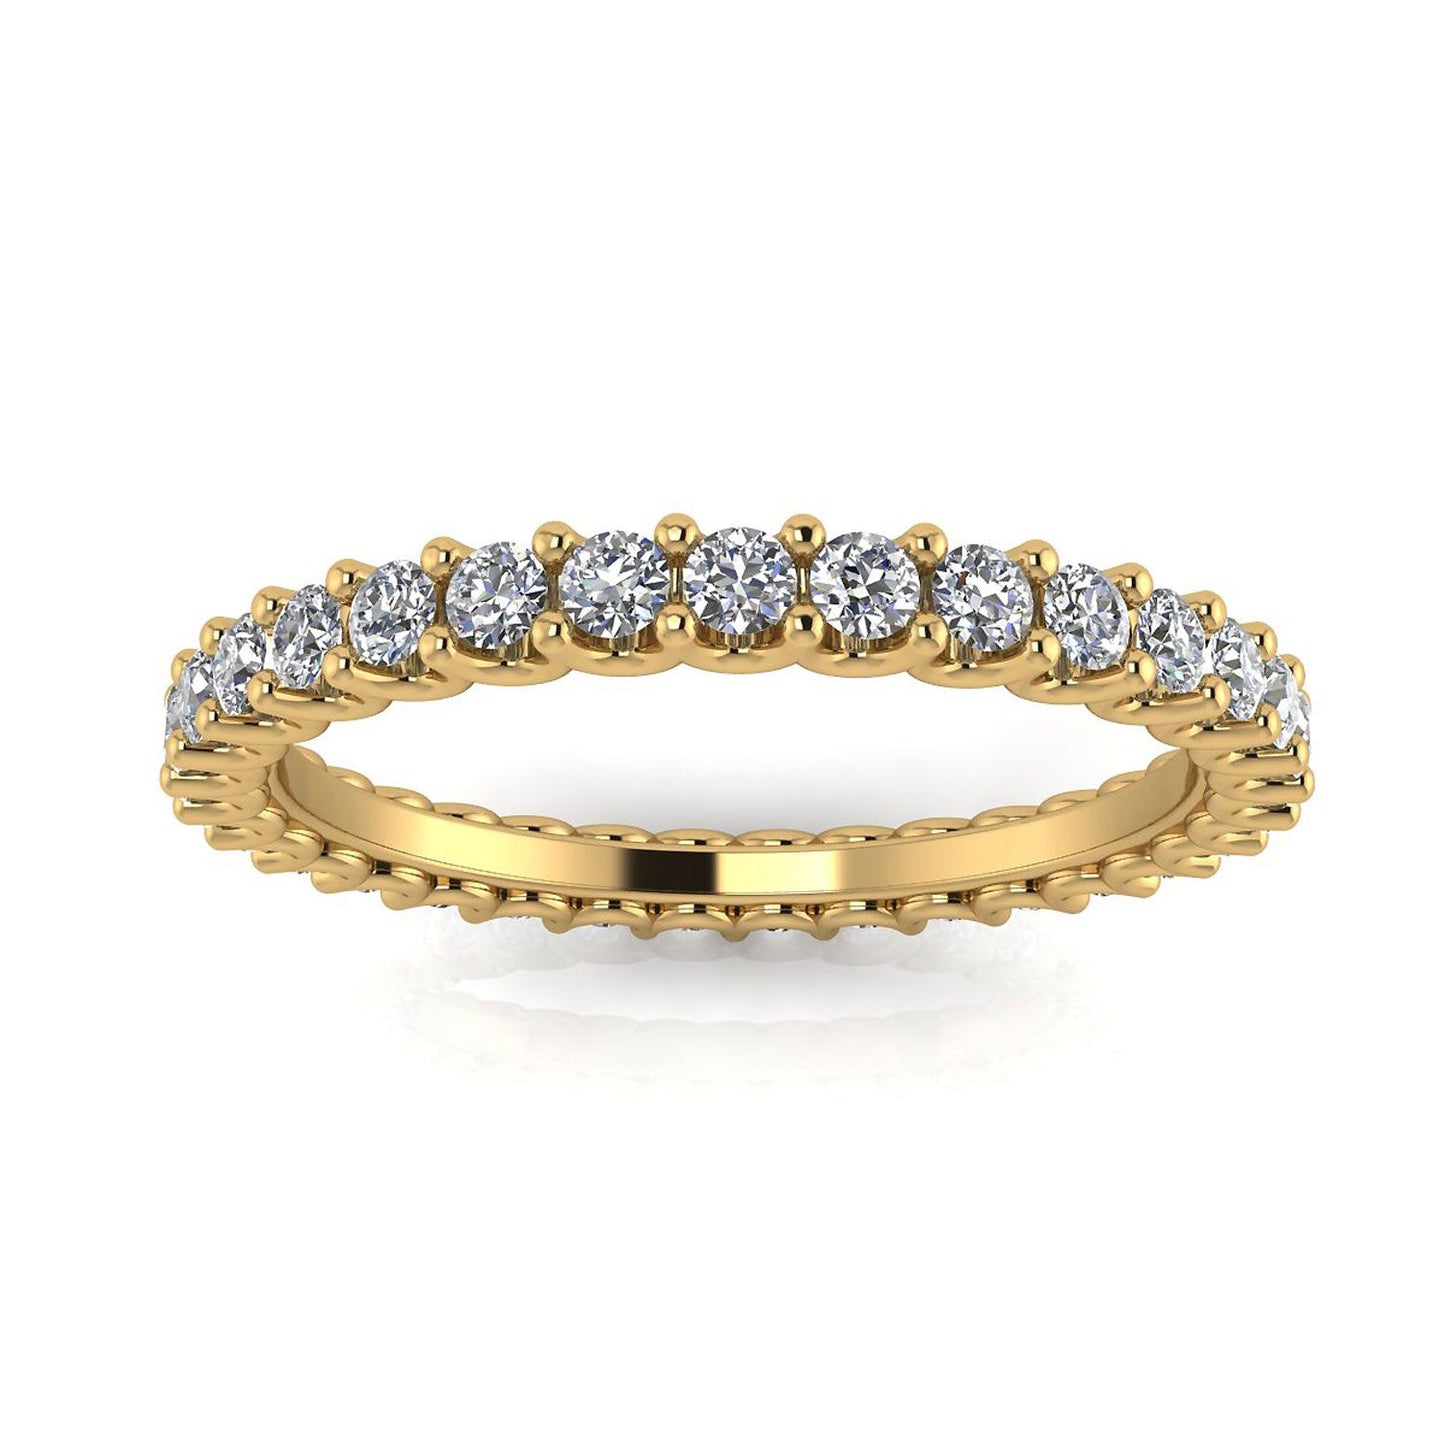 Round Brilliant Cut Diamond Shared Prong Set Eternity Ring In 14k Yellow Gold  (0.74ct. Tw.) Ring Size 8